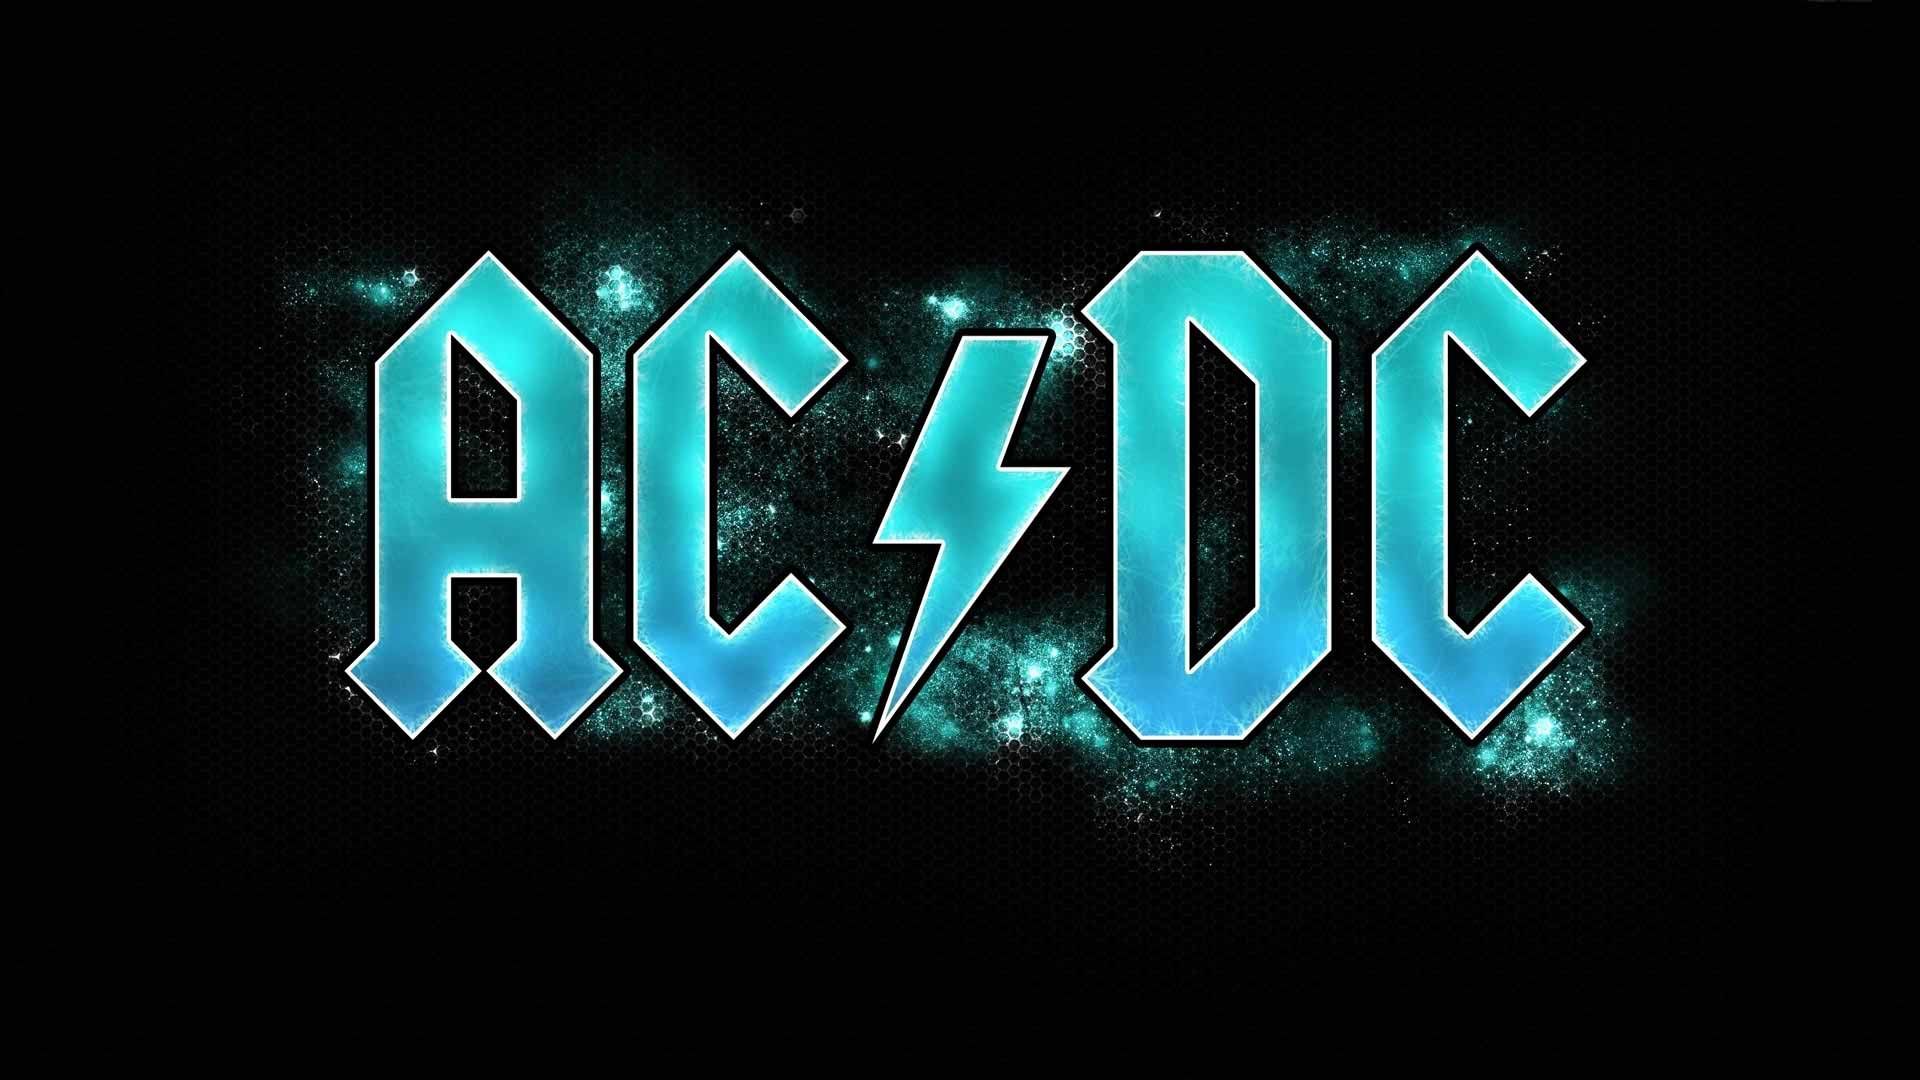 AC DC Music Wallpaper. Acdc logo, Acdc, Acdc wallpaper